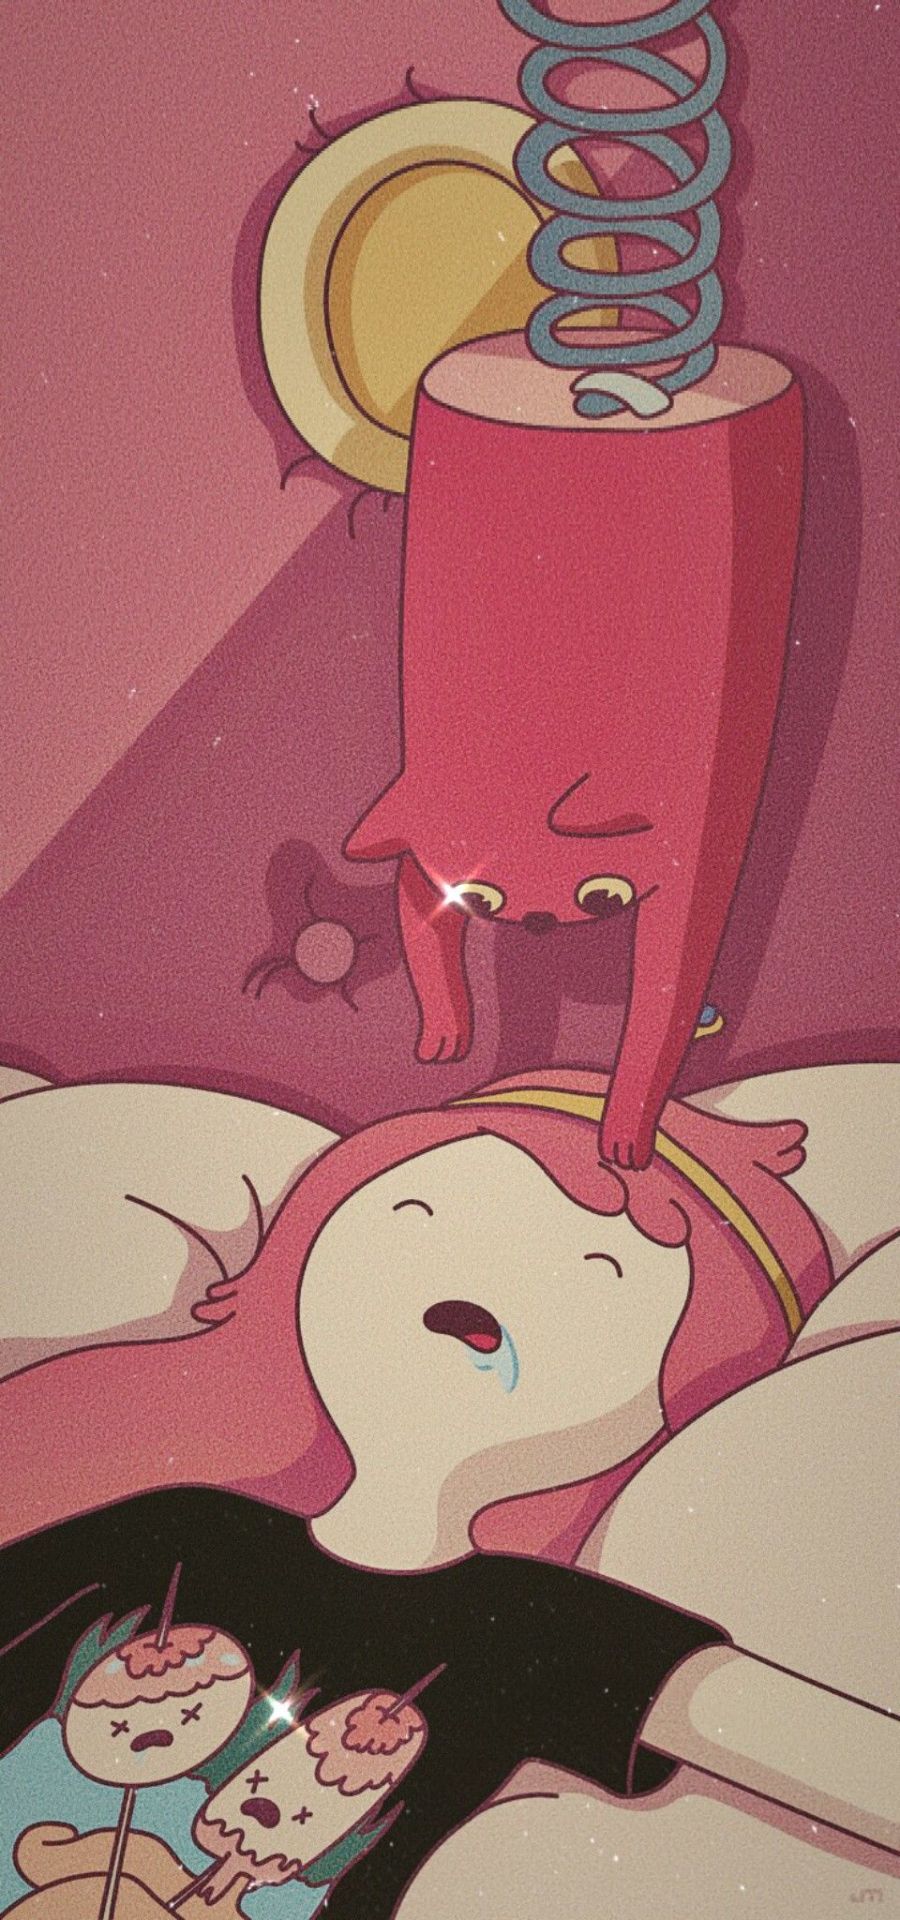 A cartoon of two people in bed - Lesbian